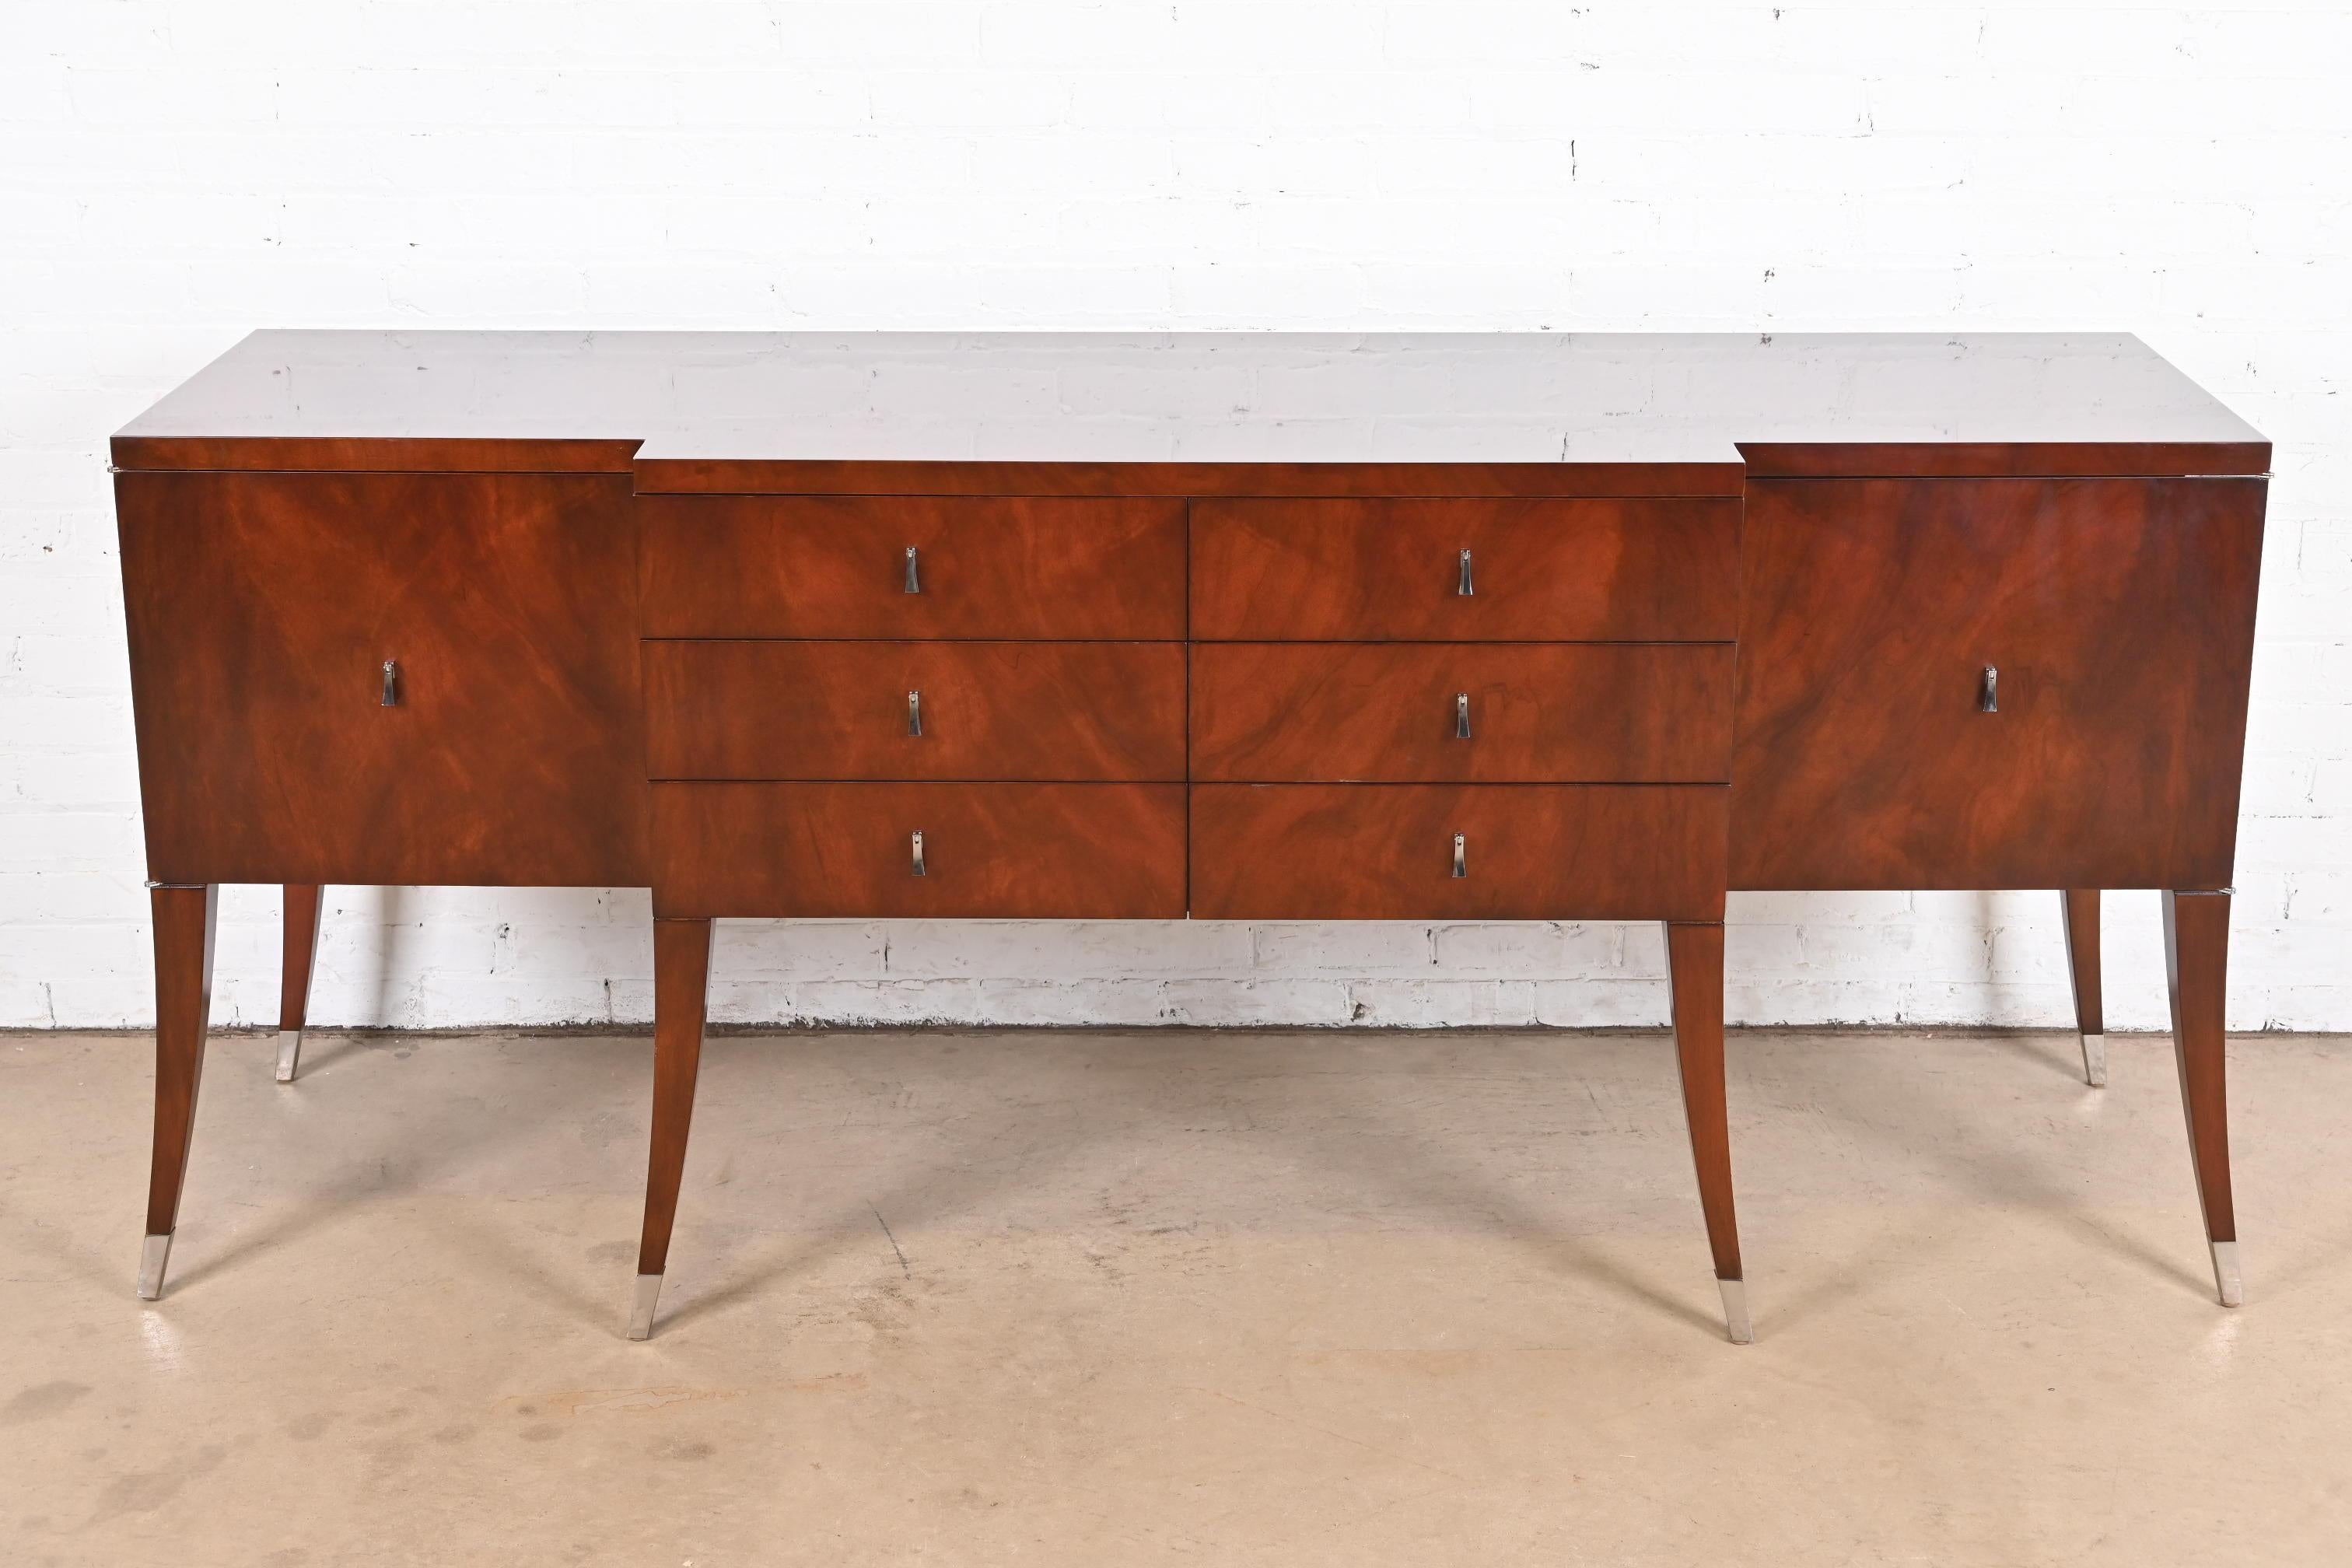 An exceptional Modern Regency style breakfront sideboard, credenza, or buffet

In the manner of Barbara Barry for Baker Furniture

By Michael Vanderbyl for Bolier & Co., 